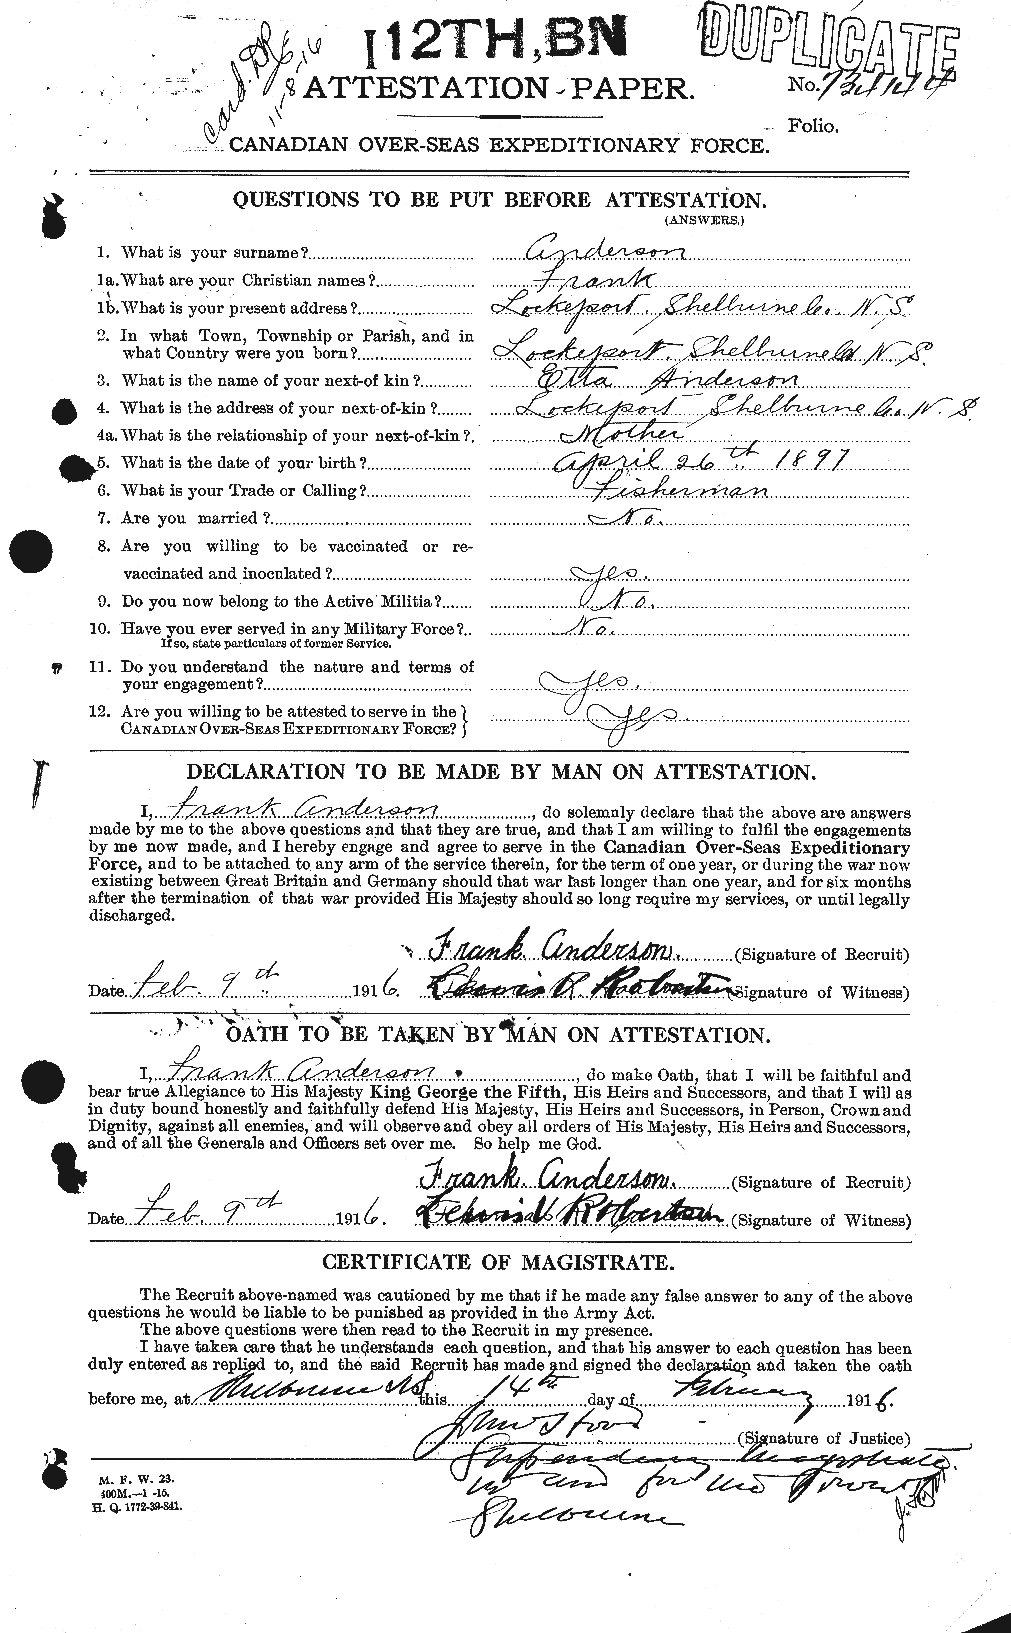 Personnel Records of the First World War - CEF 209857a